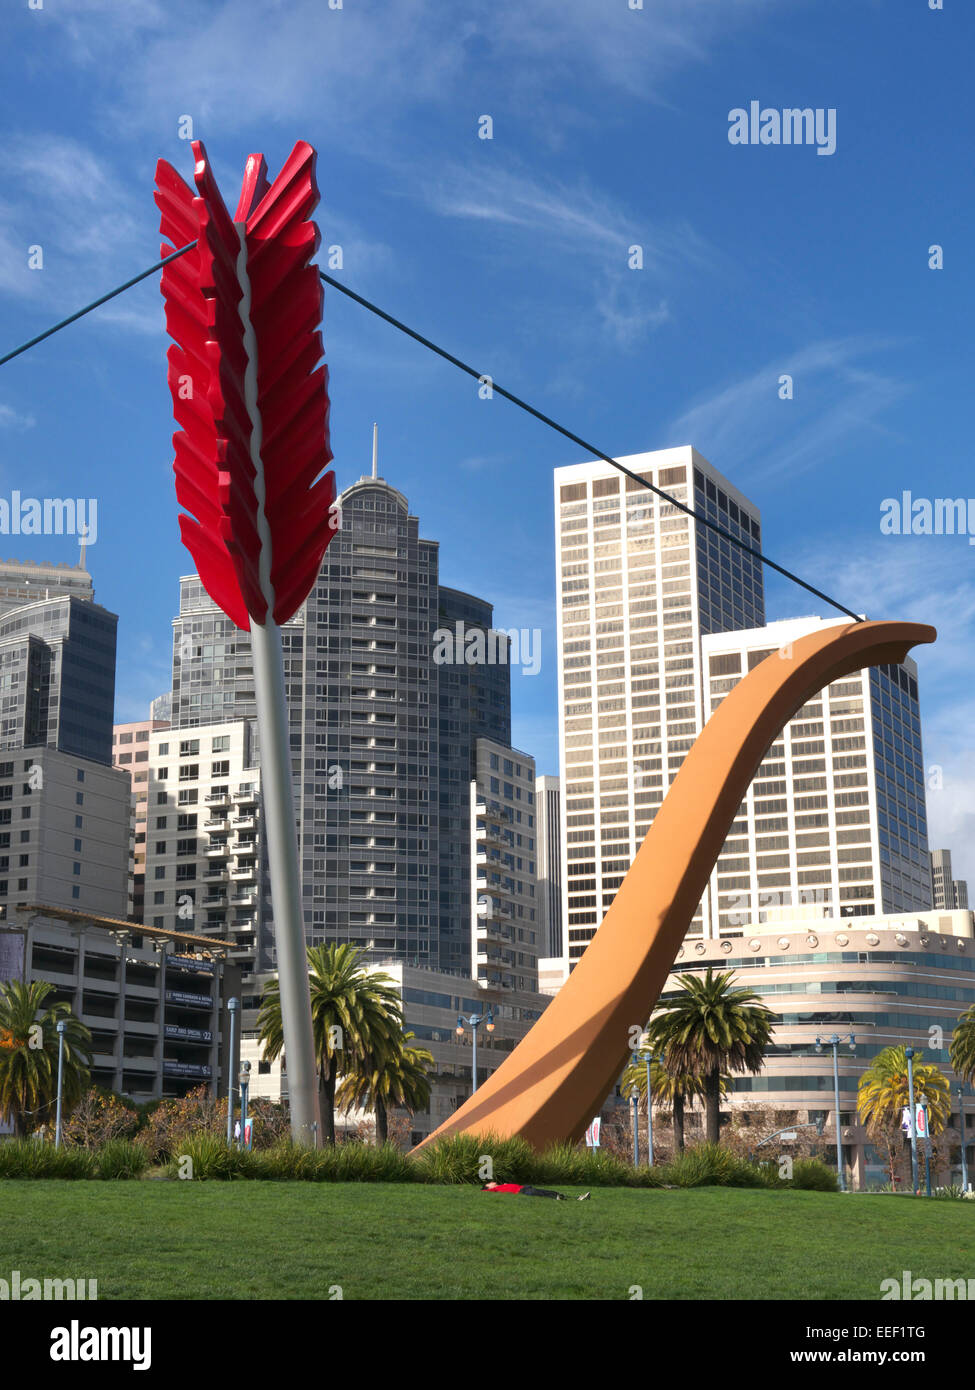 Cupid's Span' a giant bow and arrow sculpture on the Embarcadero with man  lying on grass San Francisco California USA Stock Photo - Alamy